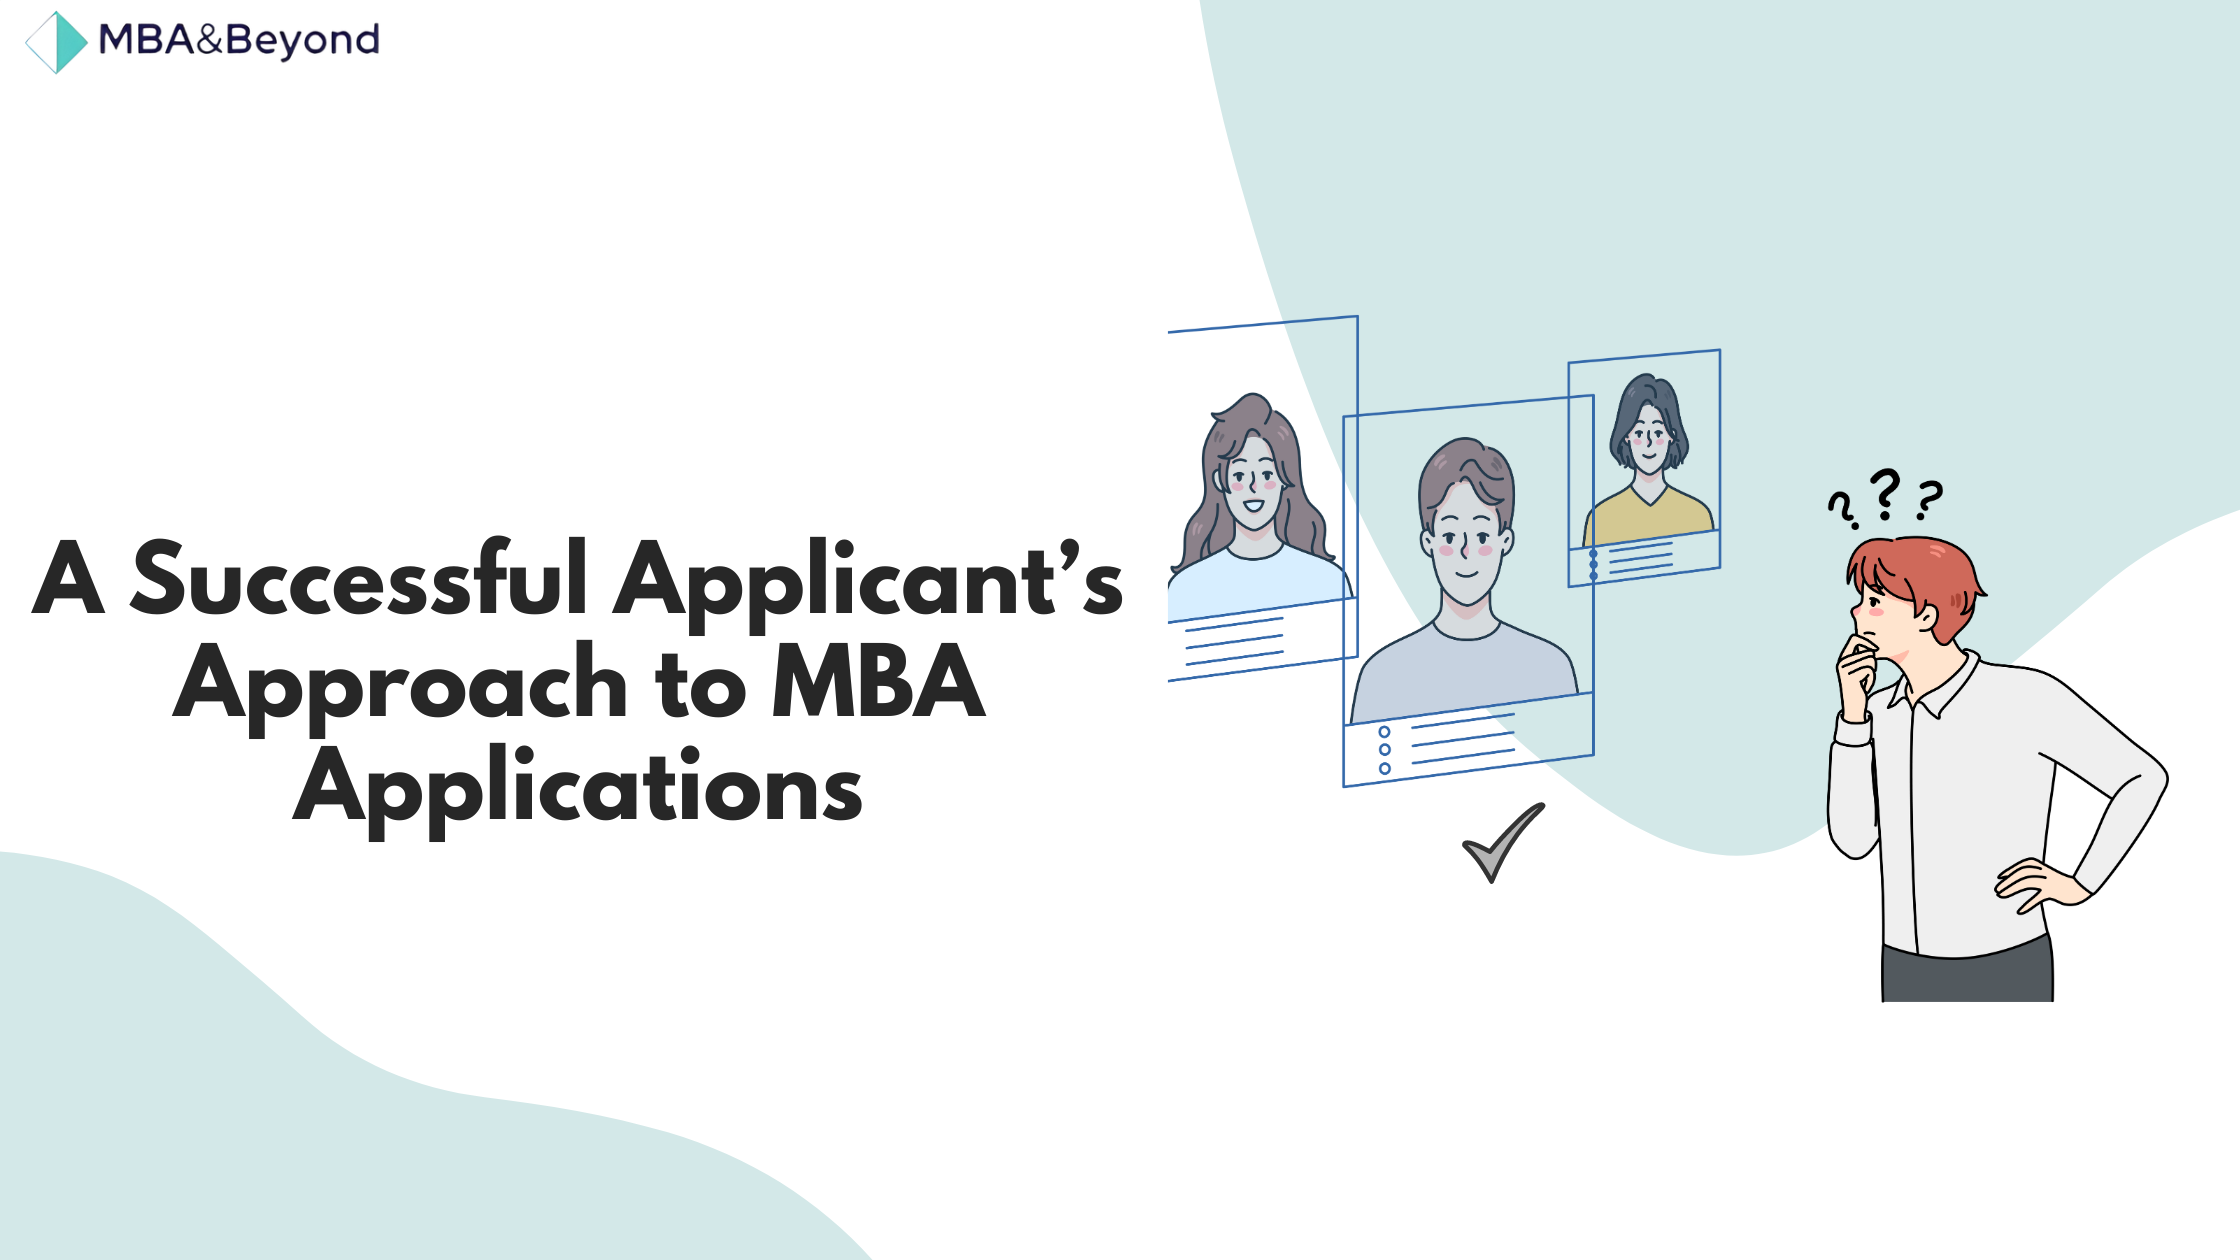 A Successful Applicant’s Approach to MBA Applications